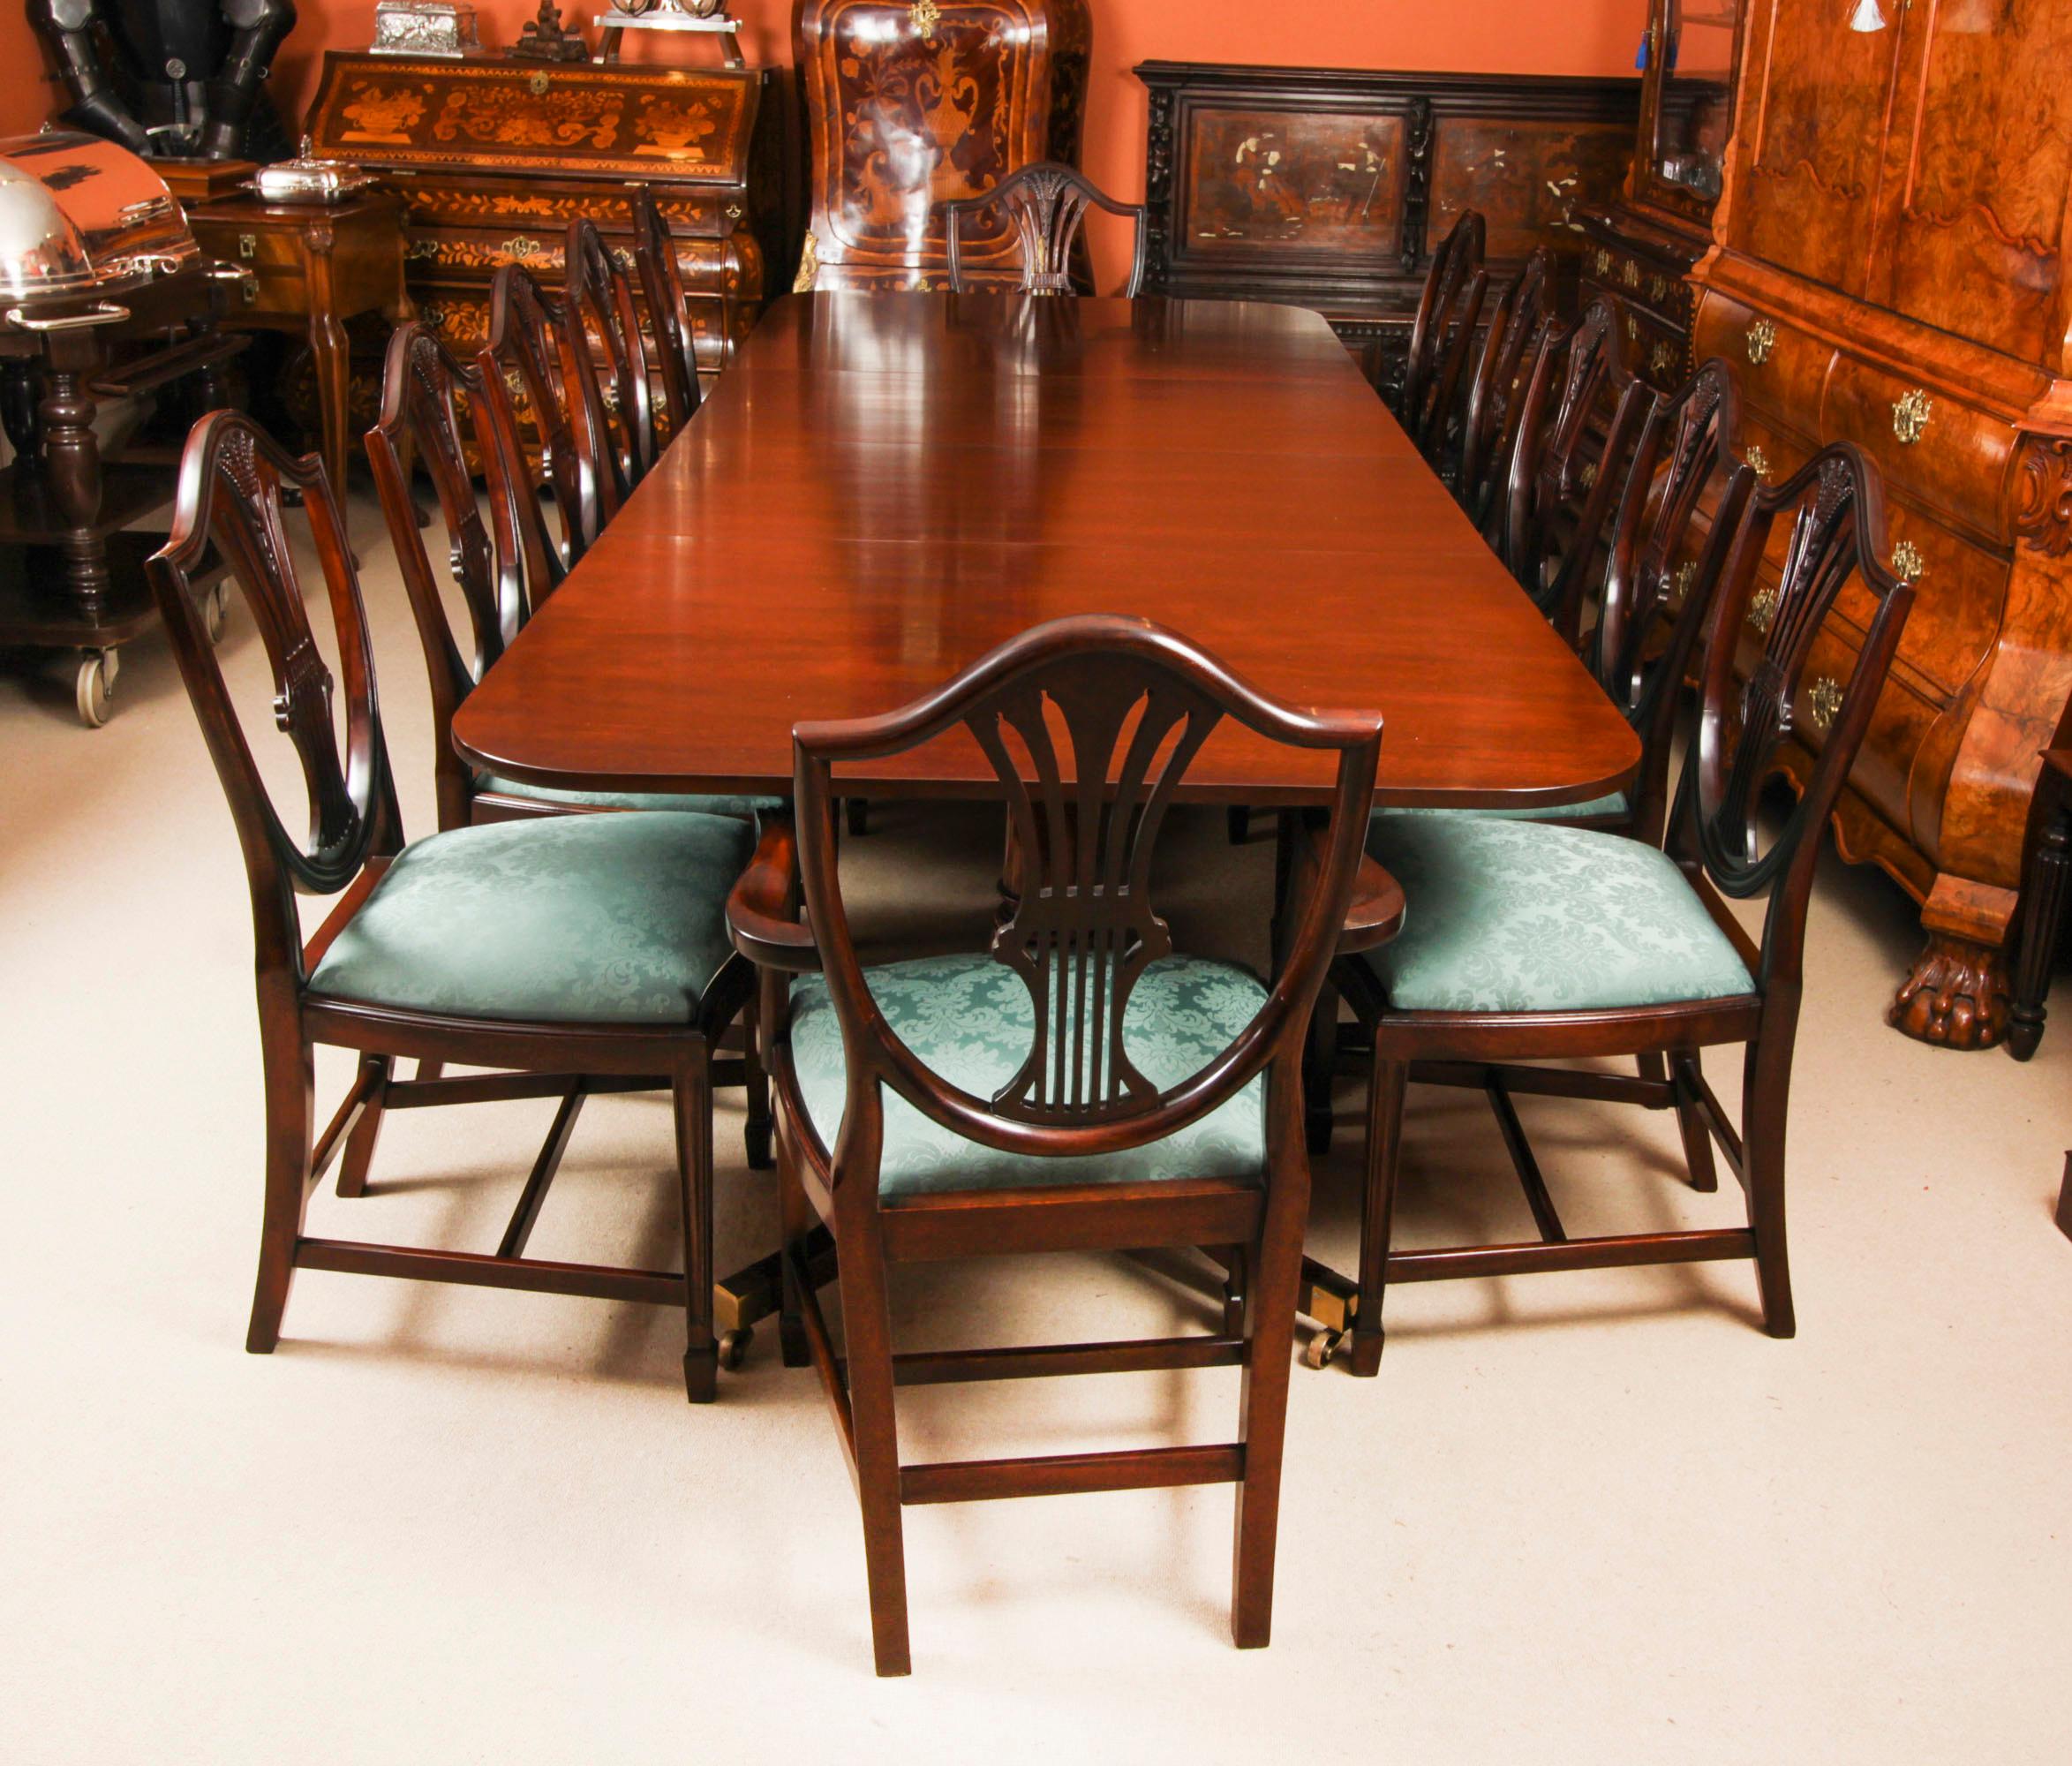 This is  fabulous Vintage dining set comprising a Regency Revival dining table and a set of twelve Wheatsheaf Shieldback  dining chairs, by the master cabinet maker William Tillman, Circa 1980 in date.

The table is made of stunning solid flame